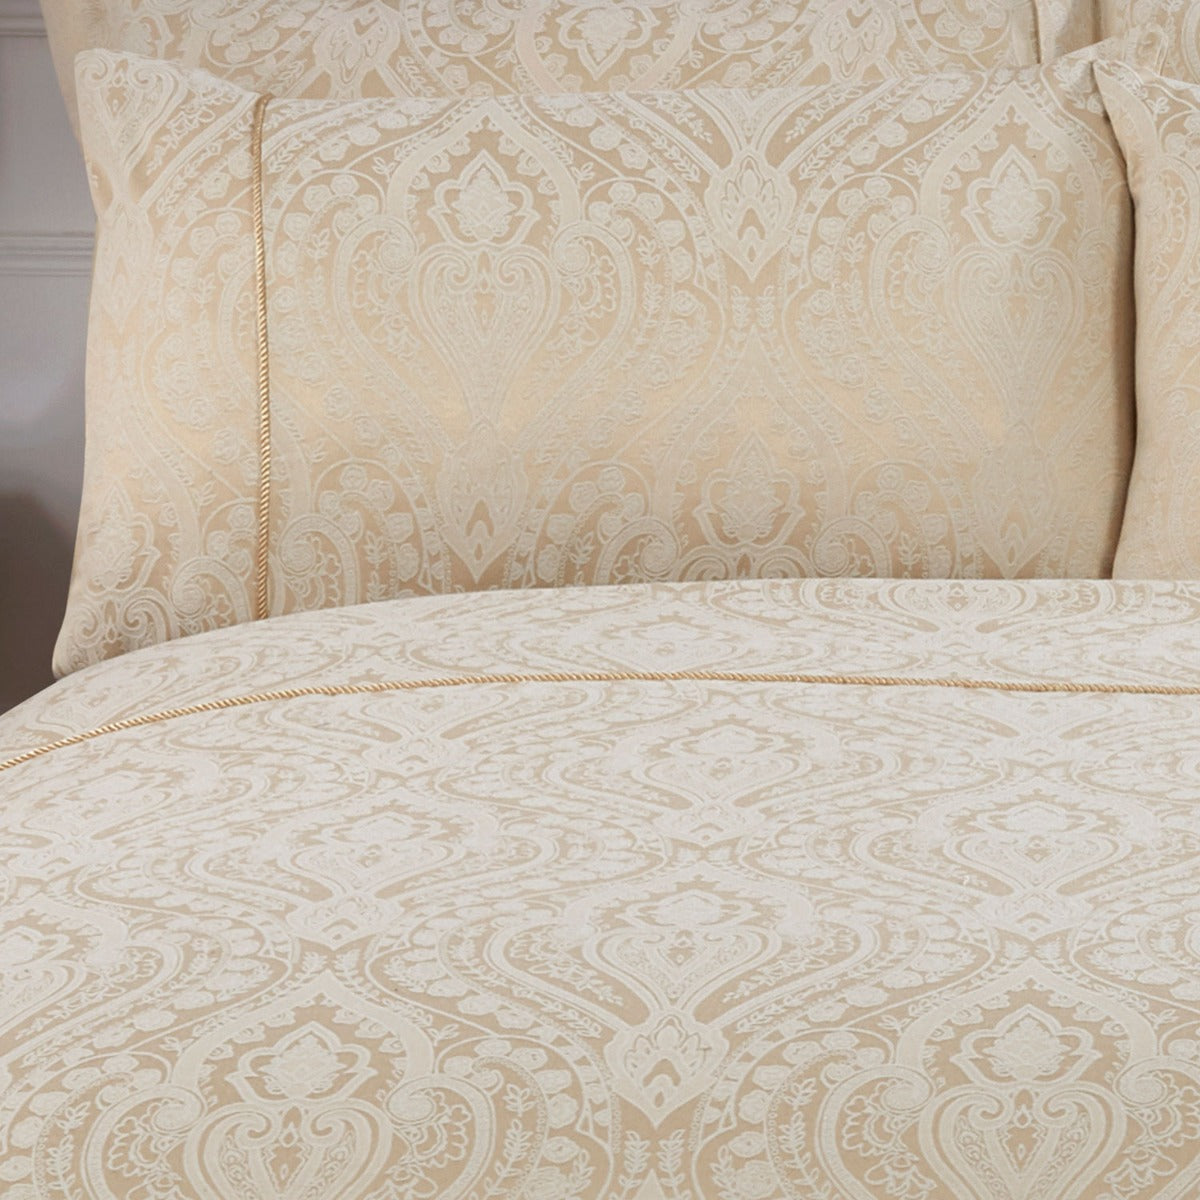 Regency Gold Luxury Cotton Rich Jacquard Housewife Pillowcases (Pair)